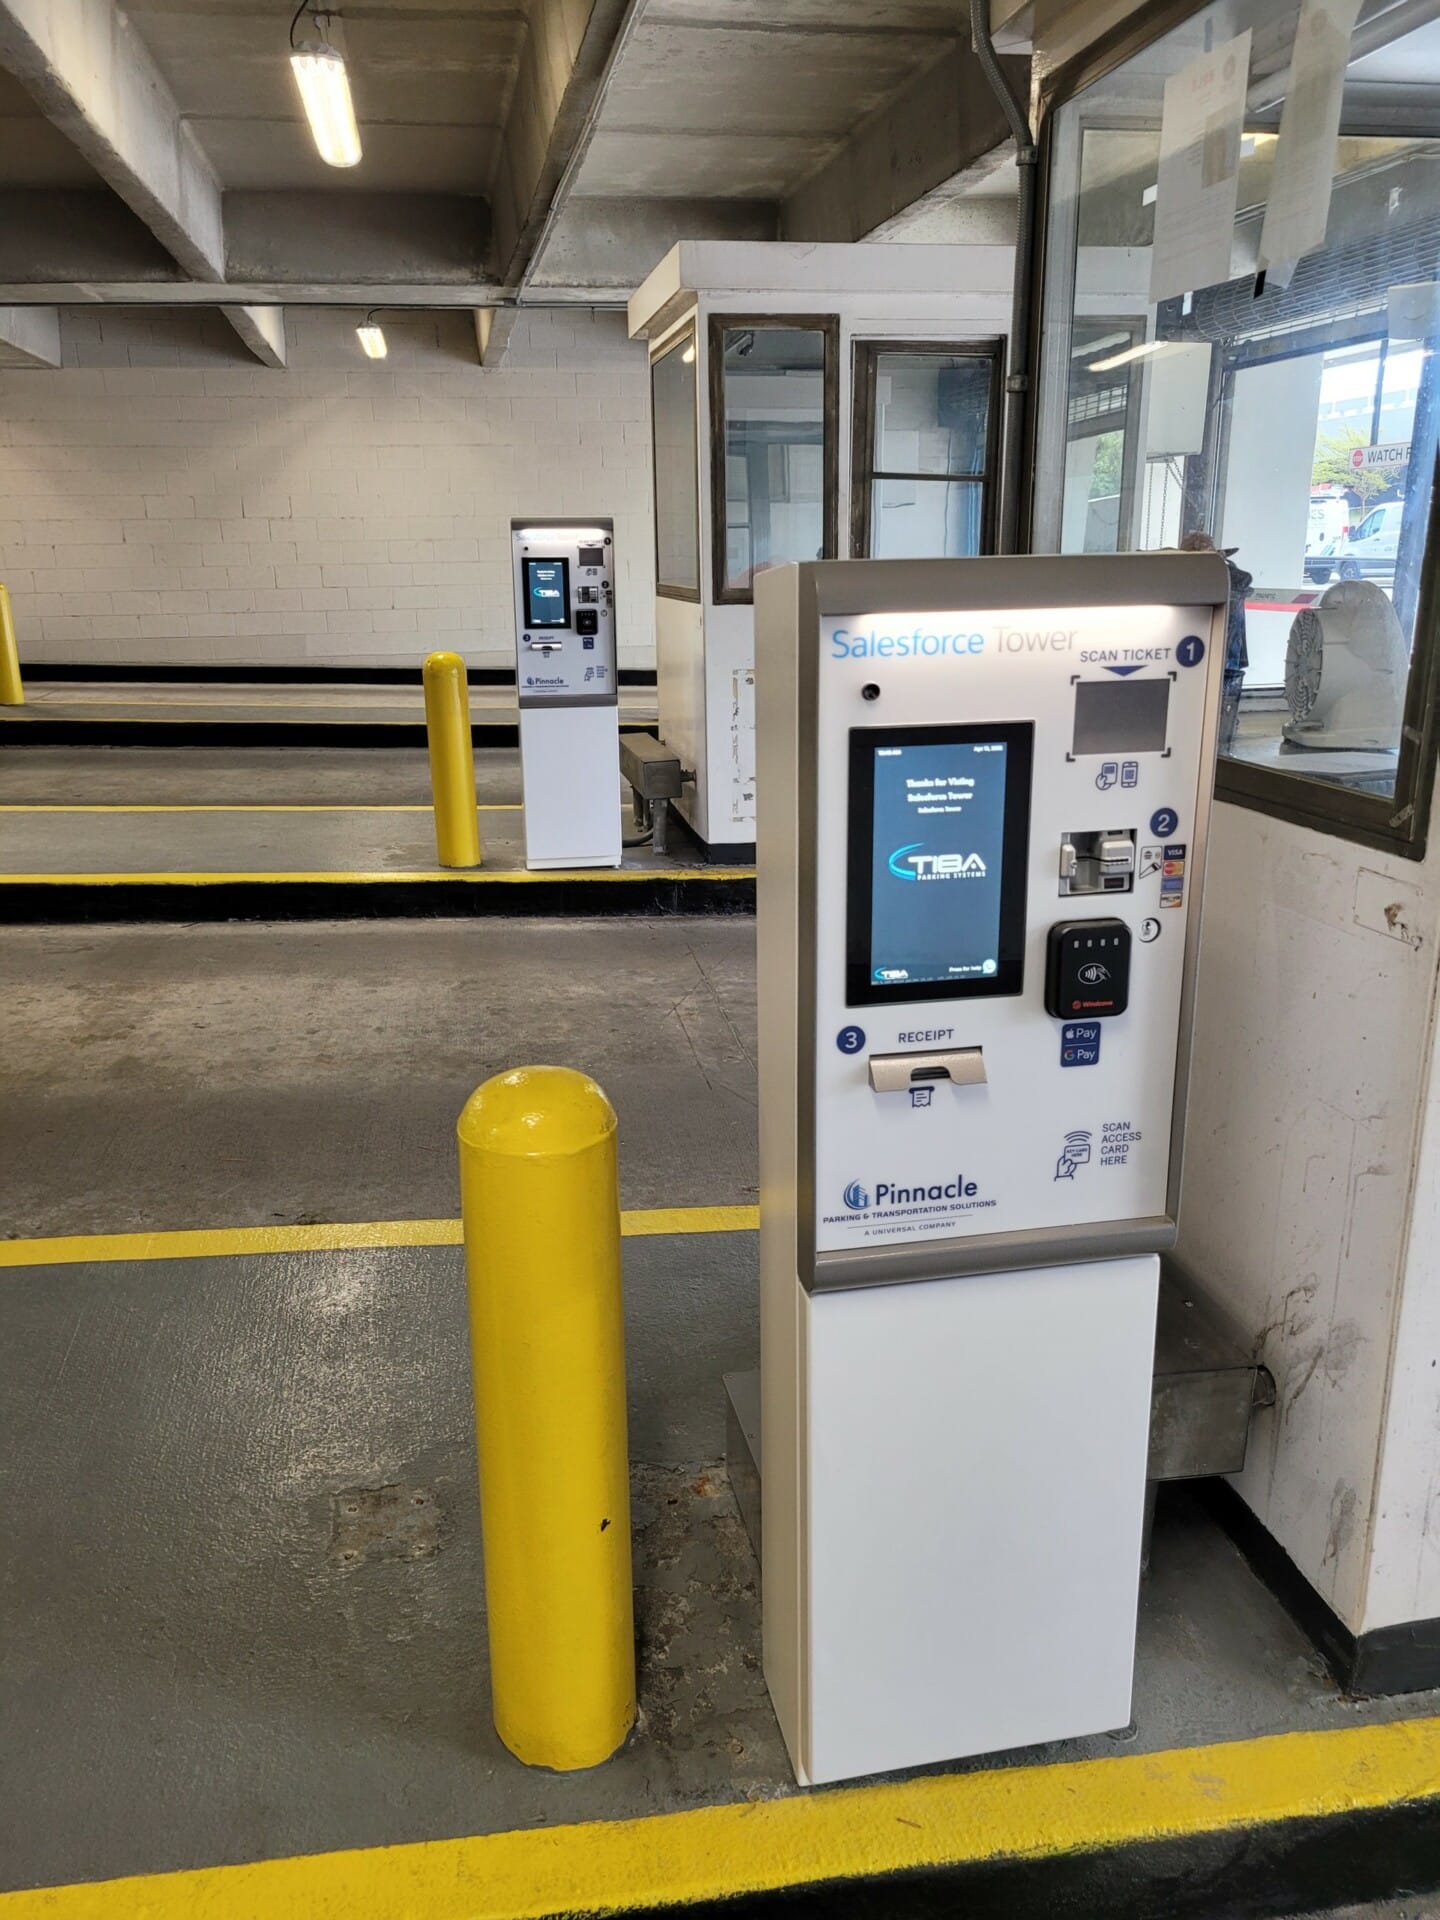 Ticket payment at exit of parking area.